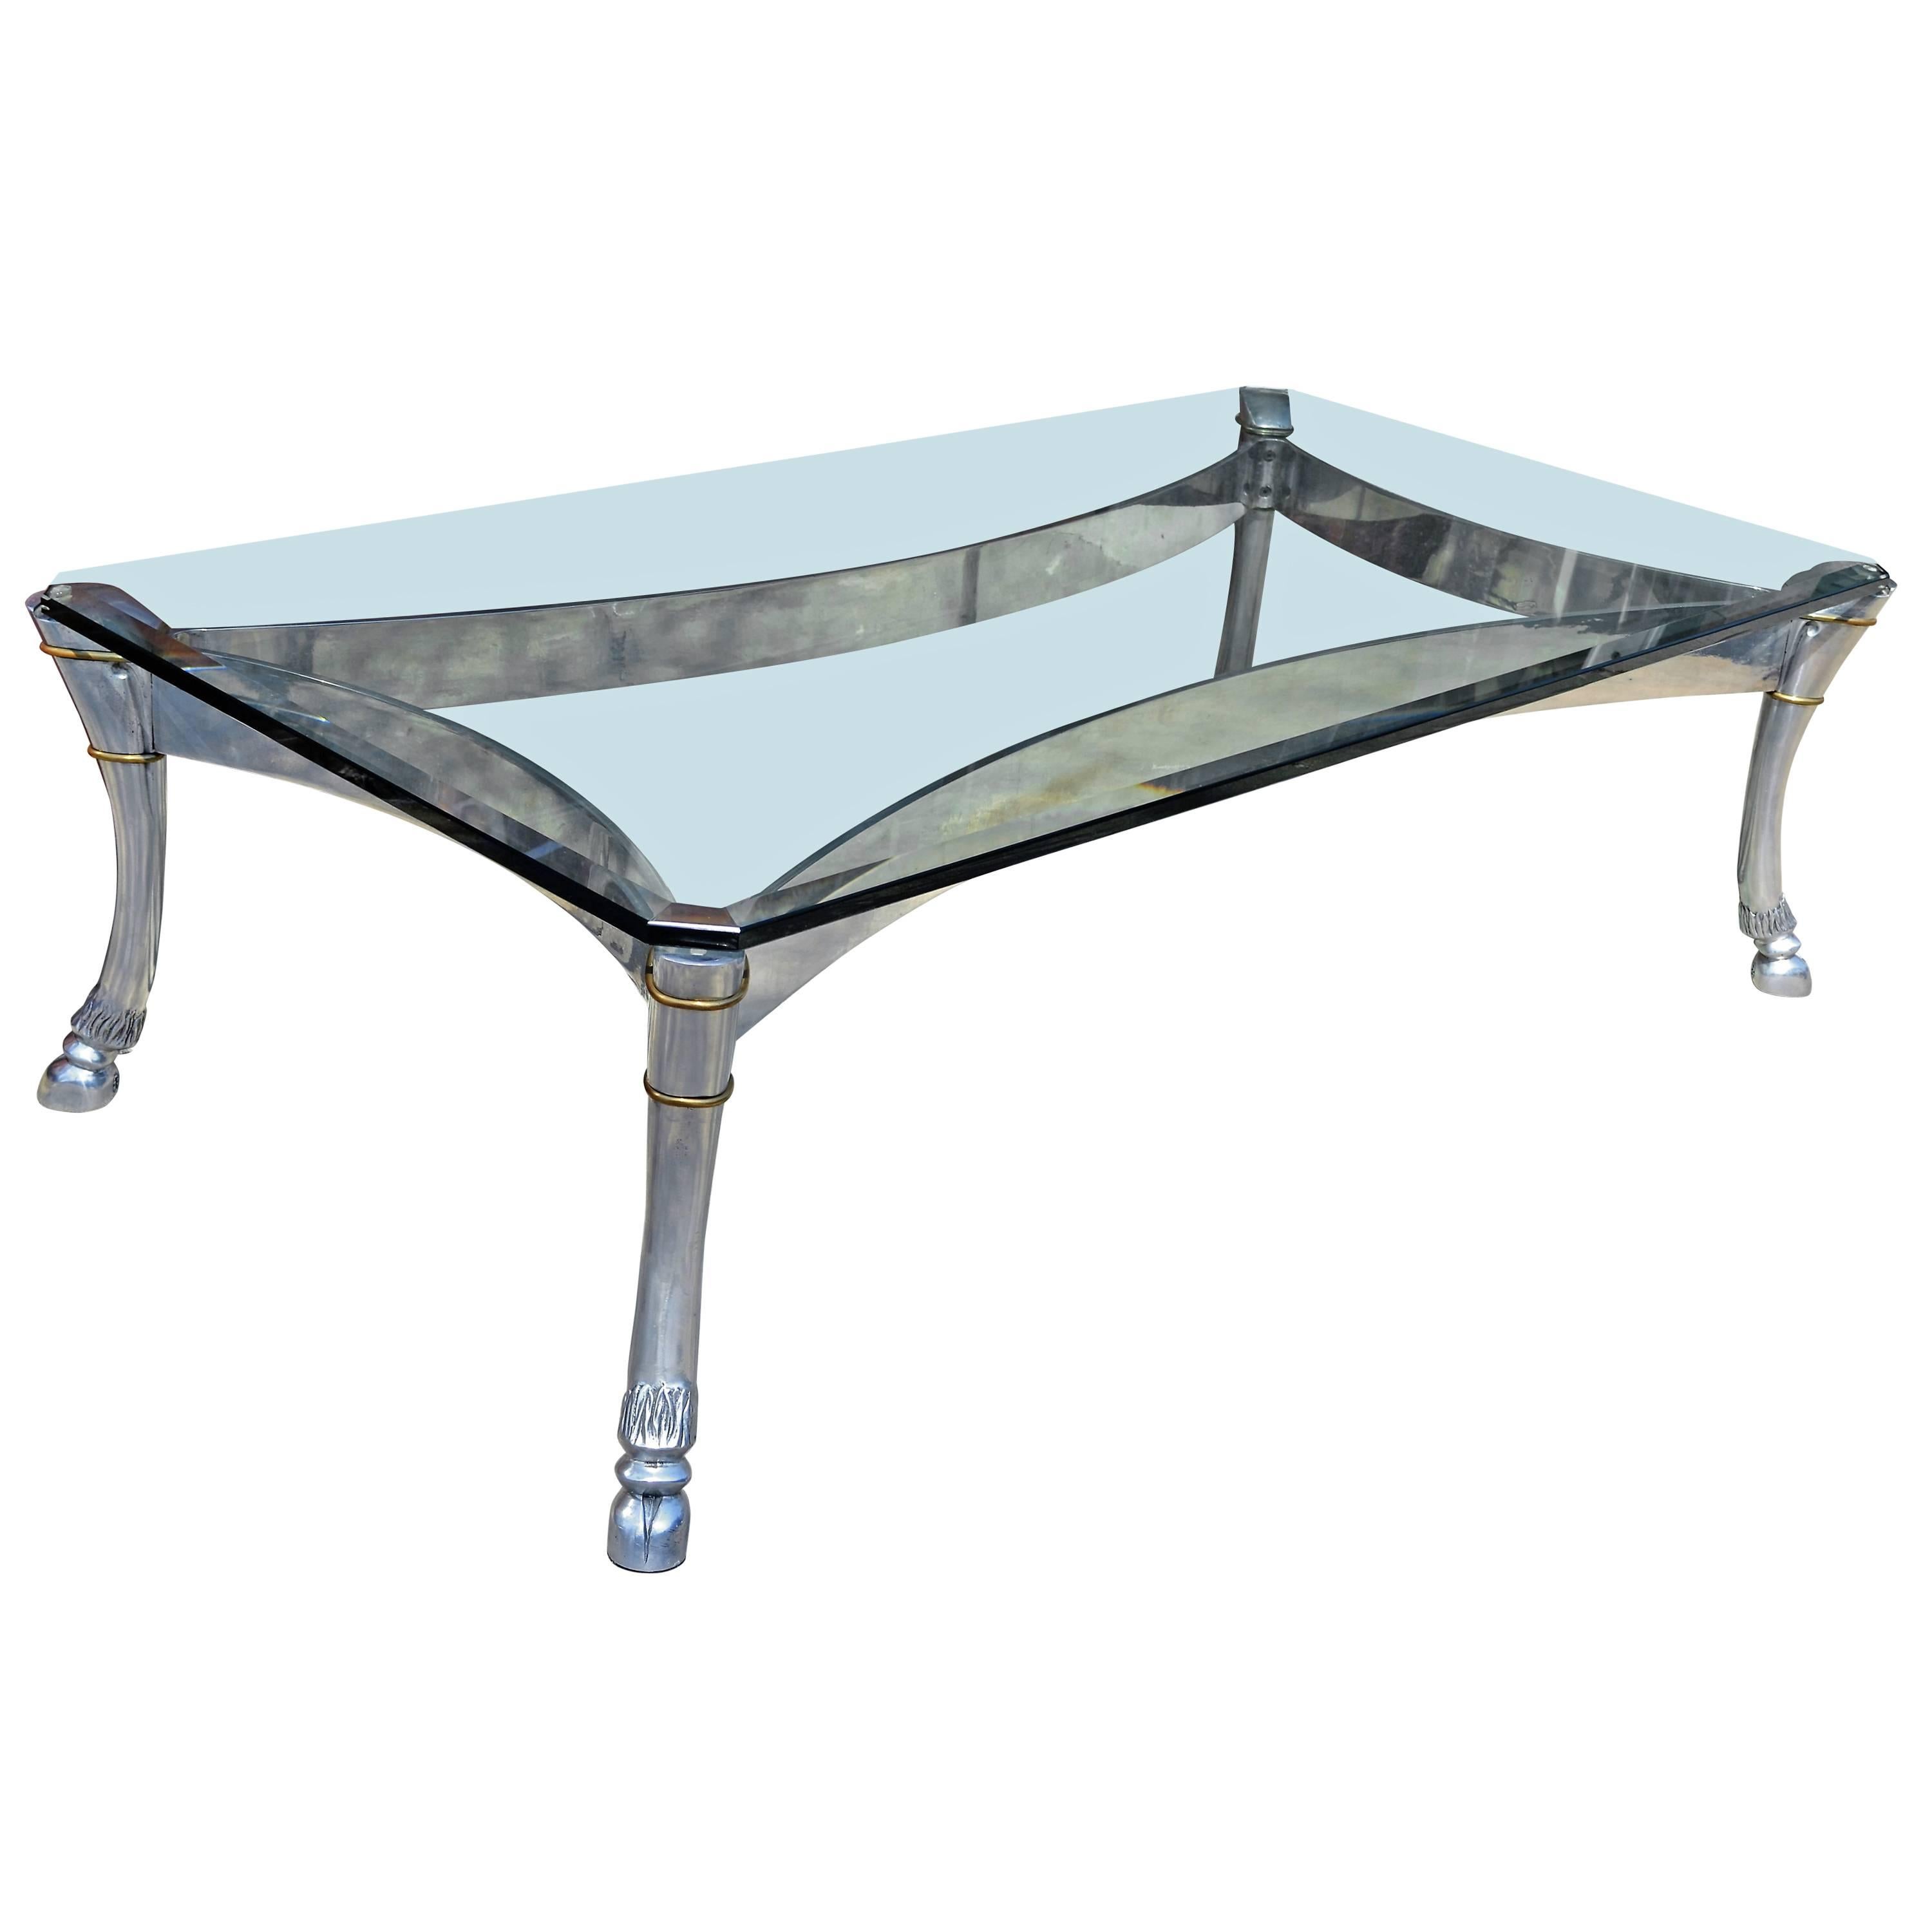 Monumental Steel and Glass Coffee Table with Large Hoofed  Legs For Sale